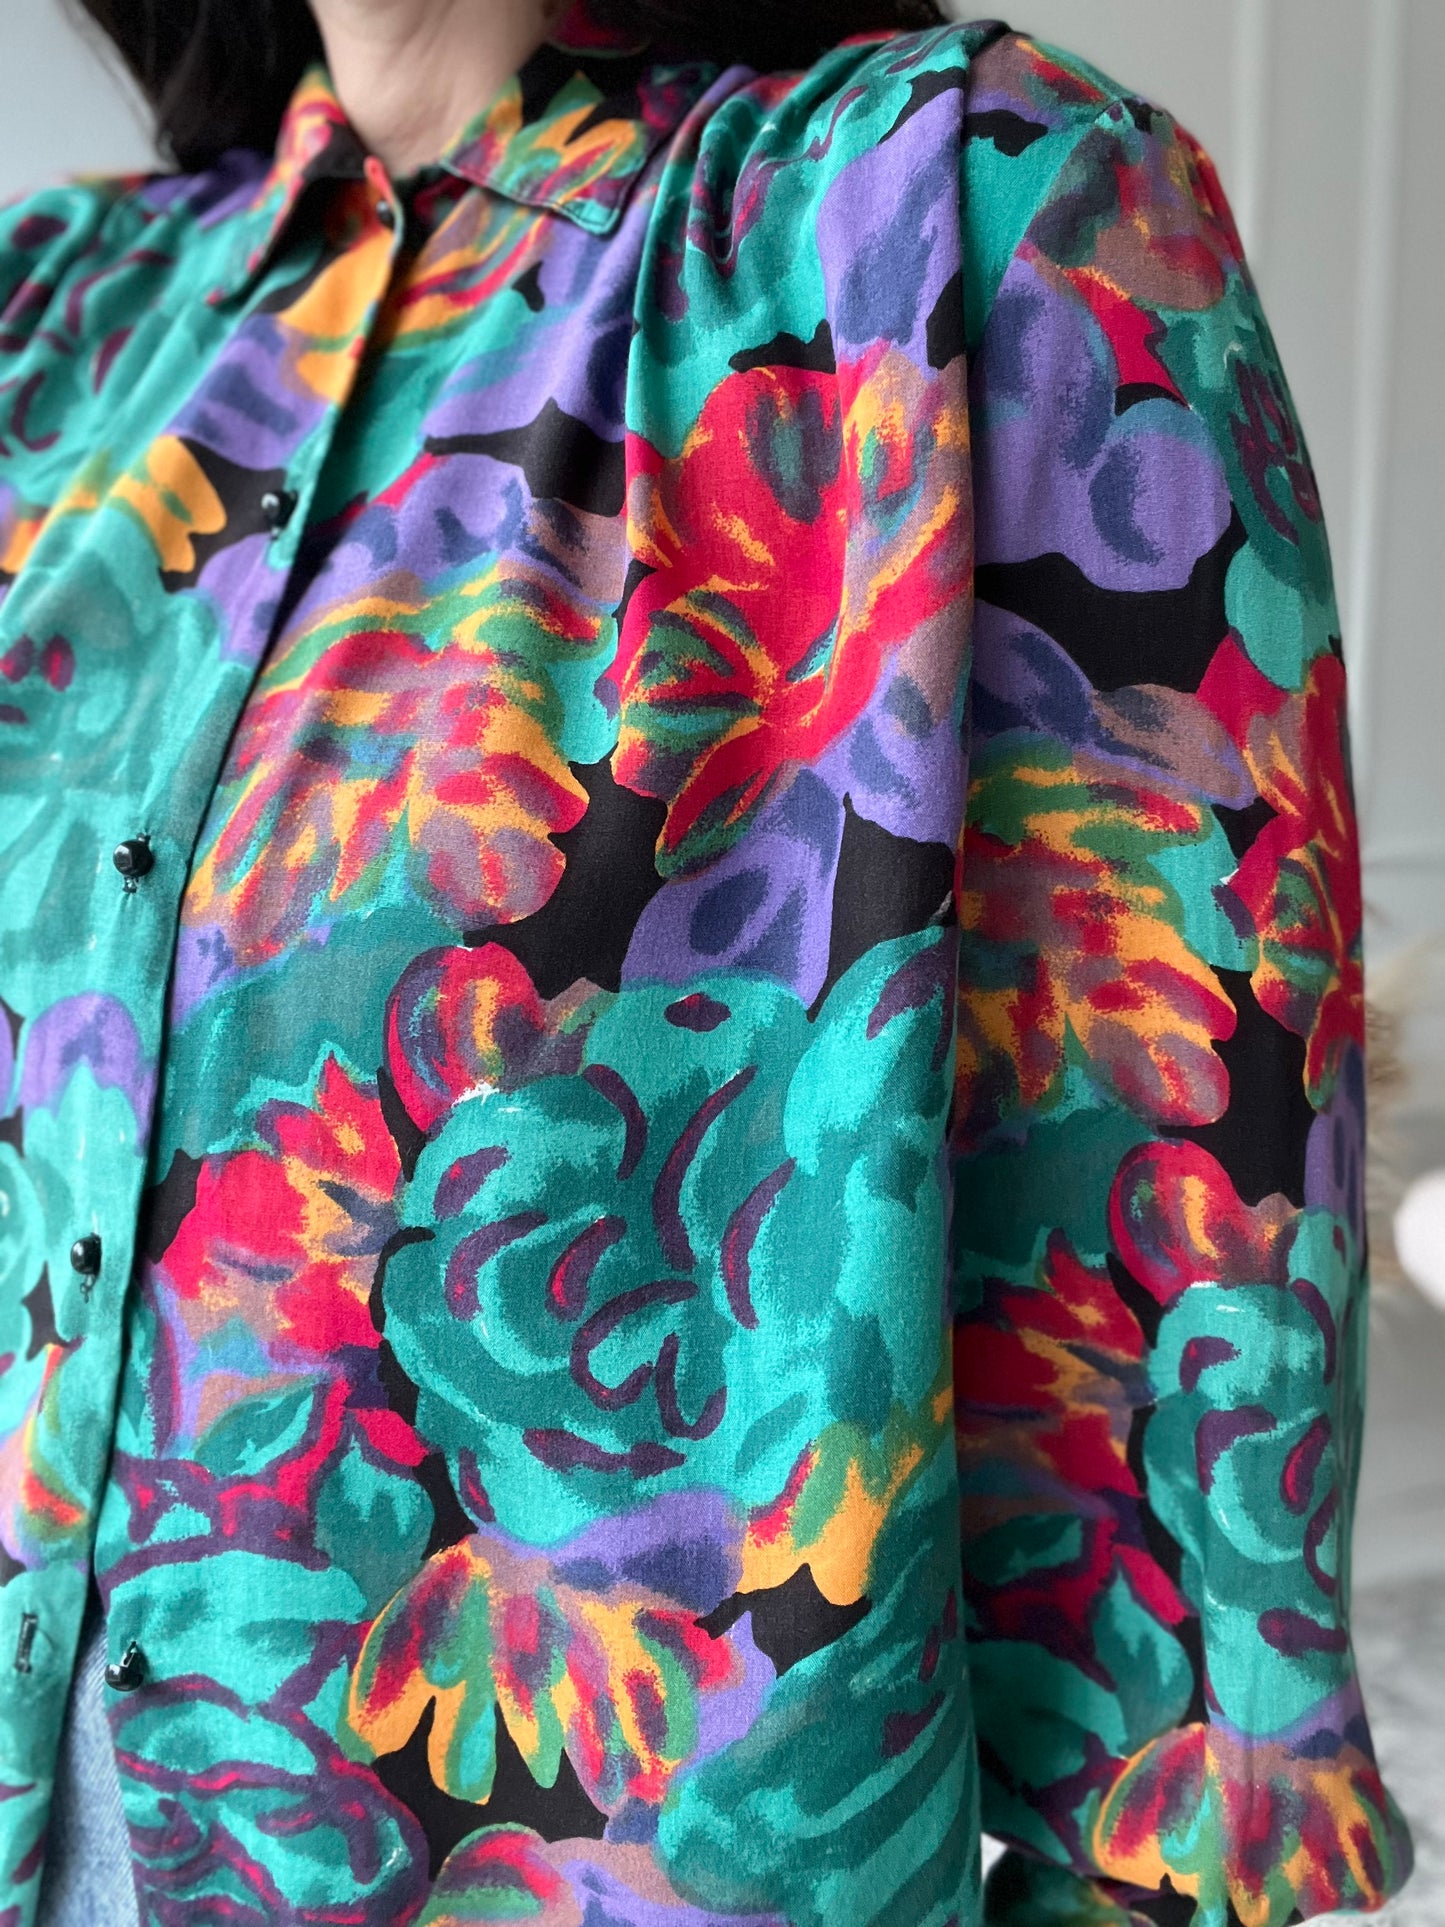 Watermark Floral Bold Blouse - Size XL